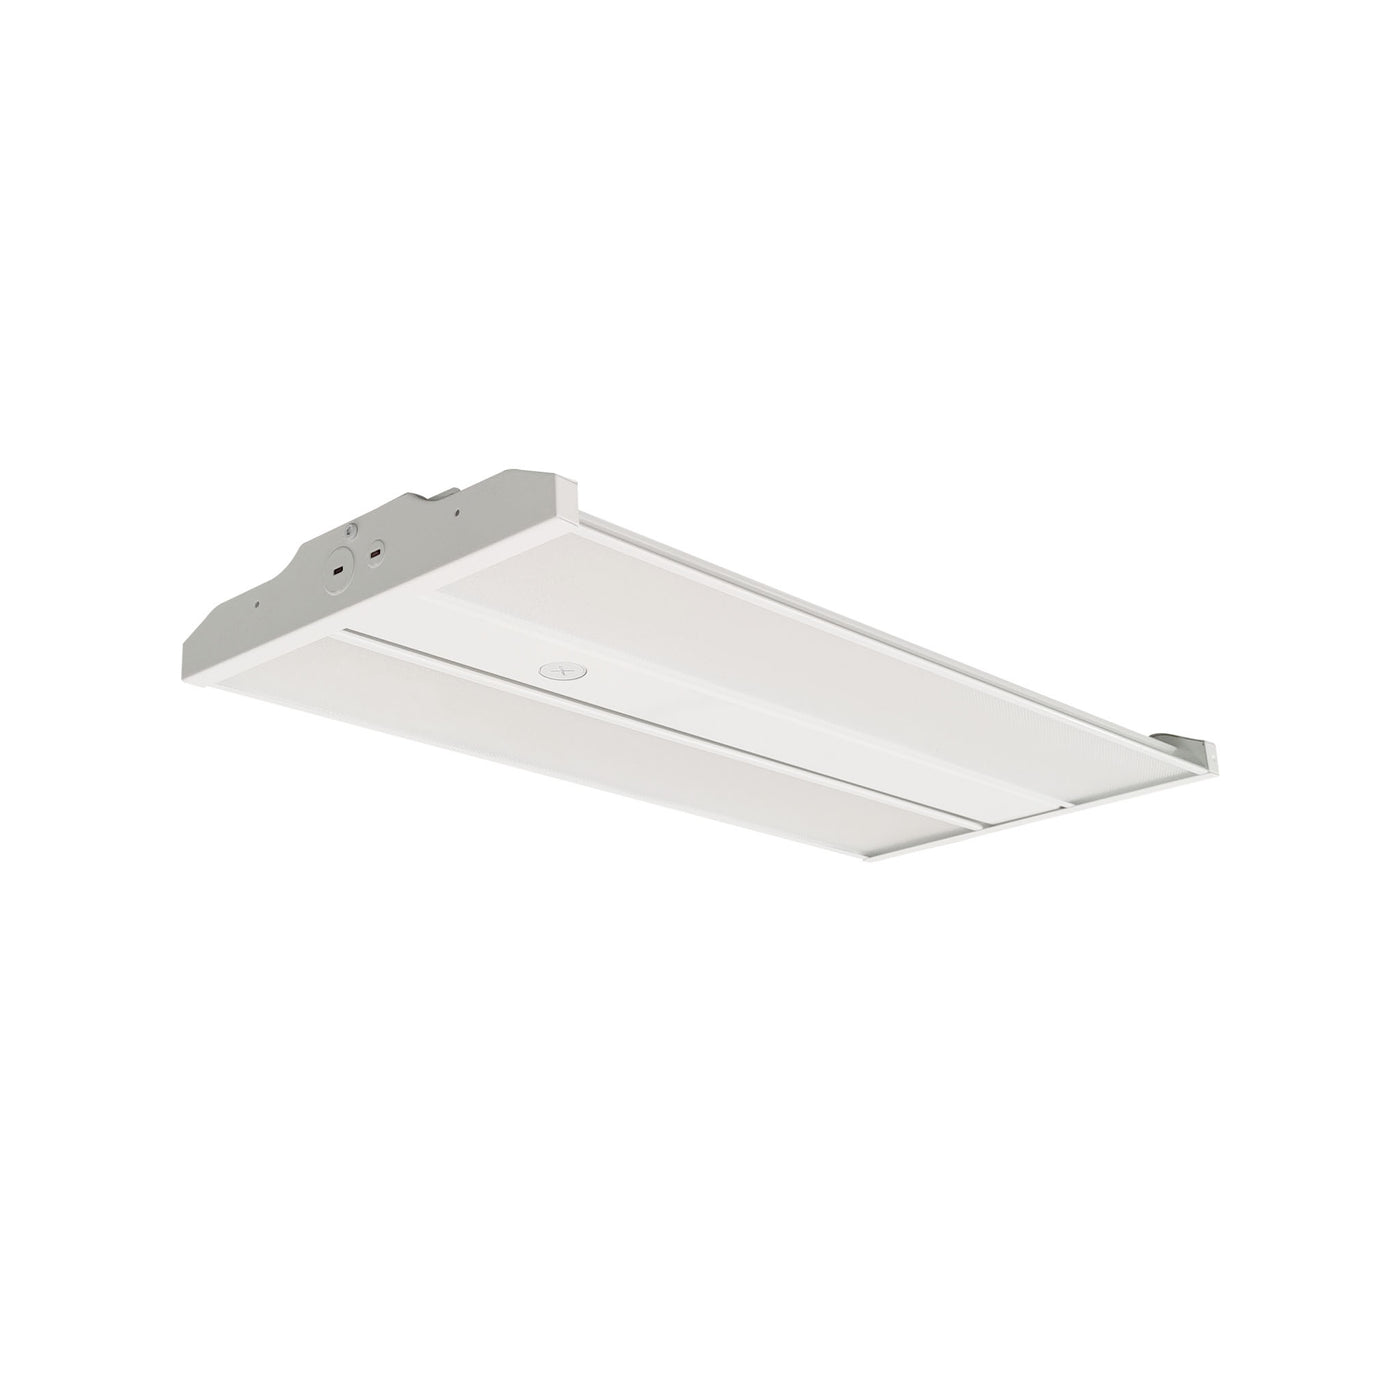 Low Profile Linear High Bay Fixture, 24000 Lumen Max, CCT Selectable, 120-277V